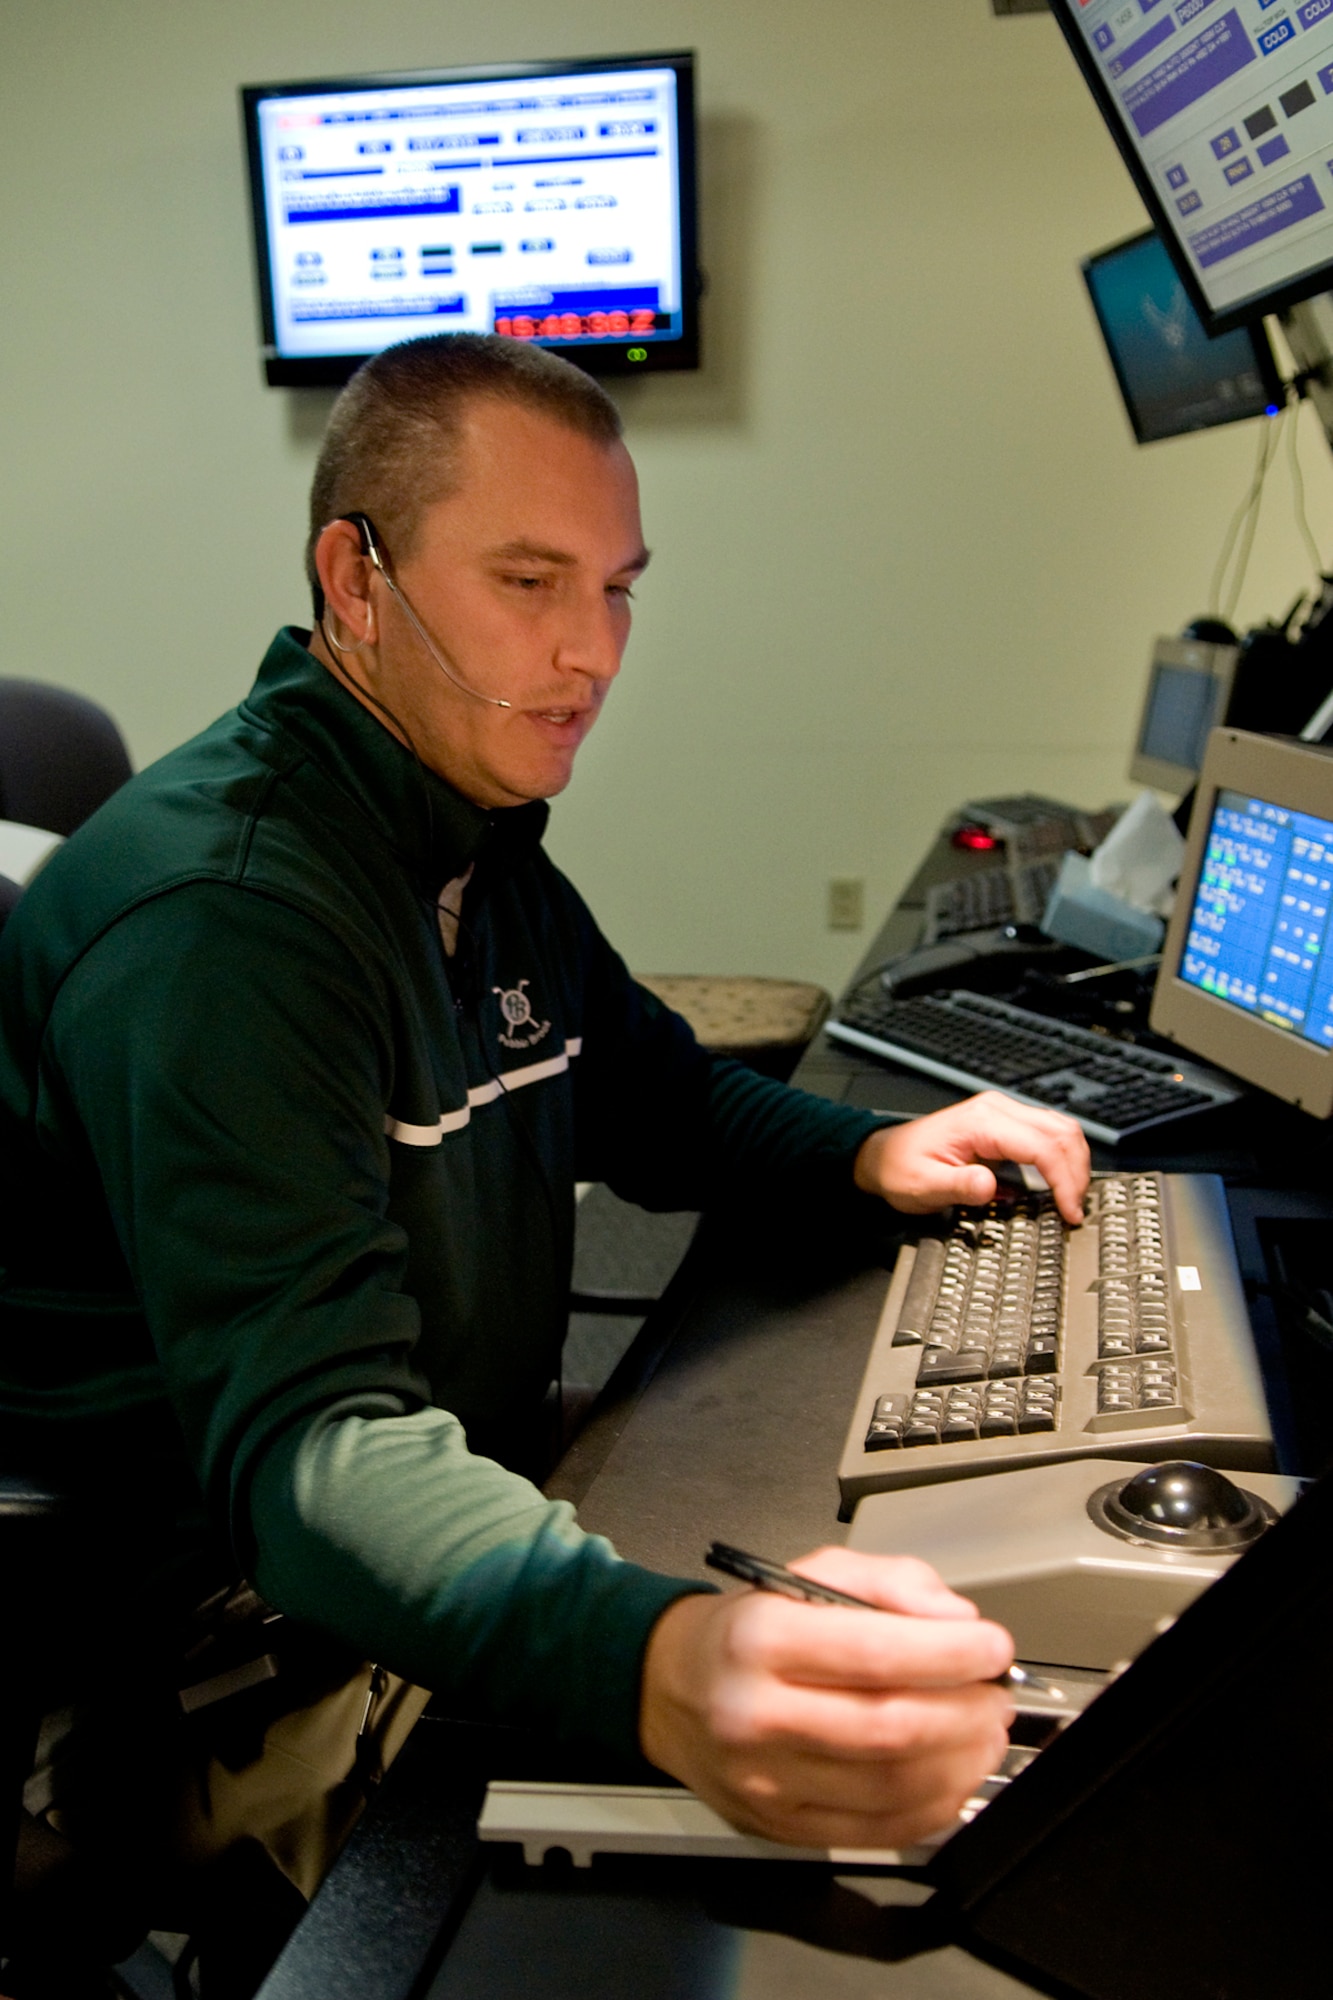 Keith Atkinson, 434th Operations Support Squadron air traffic control specialist, writes down an aircraft's flight plan information as he manages air traffic at Grissom Air Reserve Base, Ind., Sept. 29, 2014. Flight data strips are normally printed through an automated system, but in the aftermath of a fire at Chicago's Air Route Traffic Control Center, Grissom controllers were forced to manually coordinate flight data with surrounding approach control facilities. (U.S. Air Force photo/Mark R. W. Orders-Woempner)